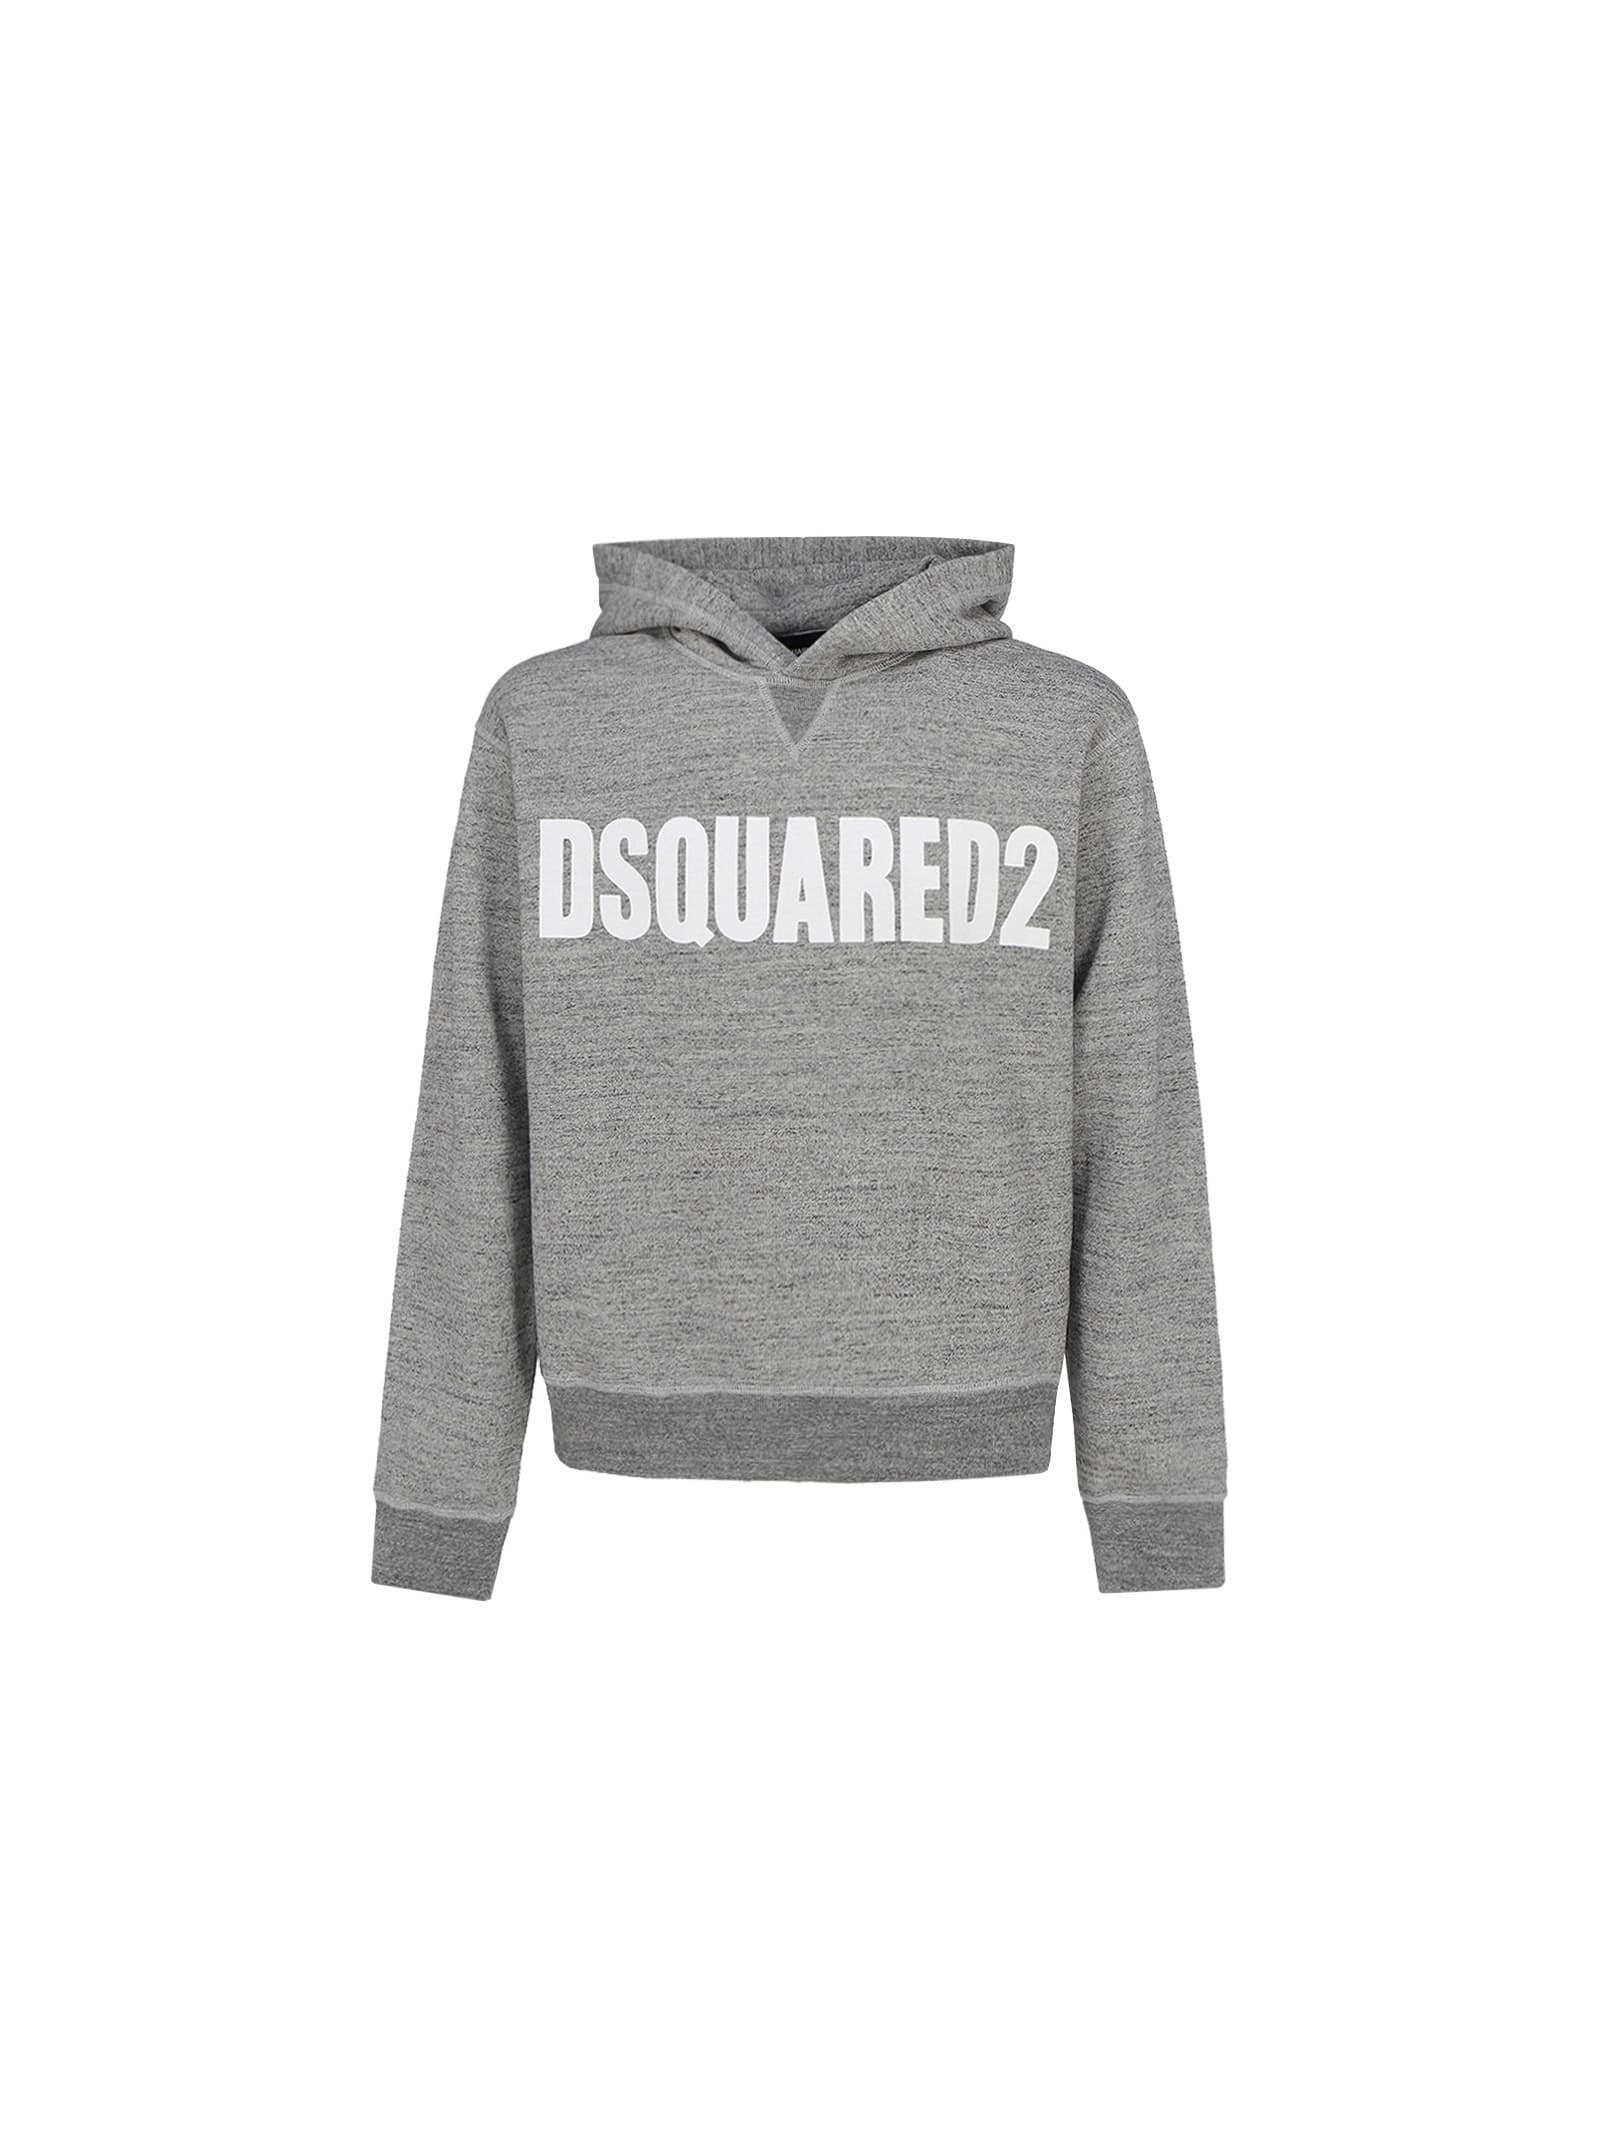 dsquared2 hoodie price